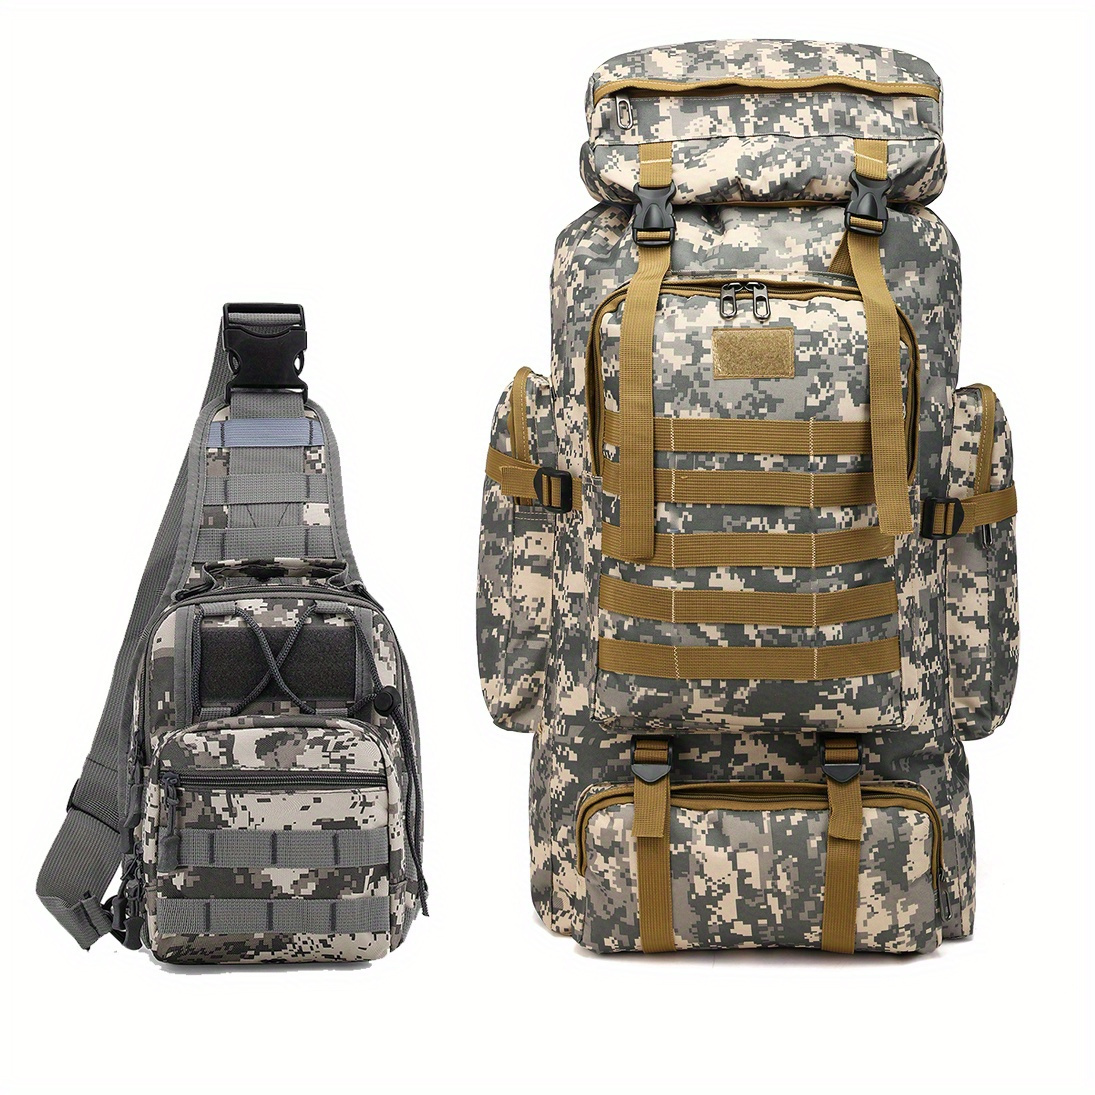 

2 Large-capacity Camouflage Backpack Hiking Bag Outdoor Backpack